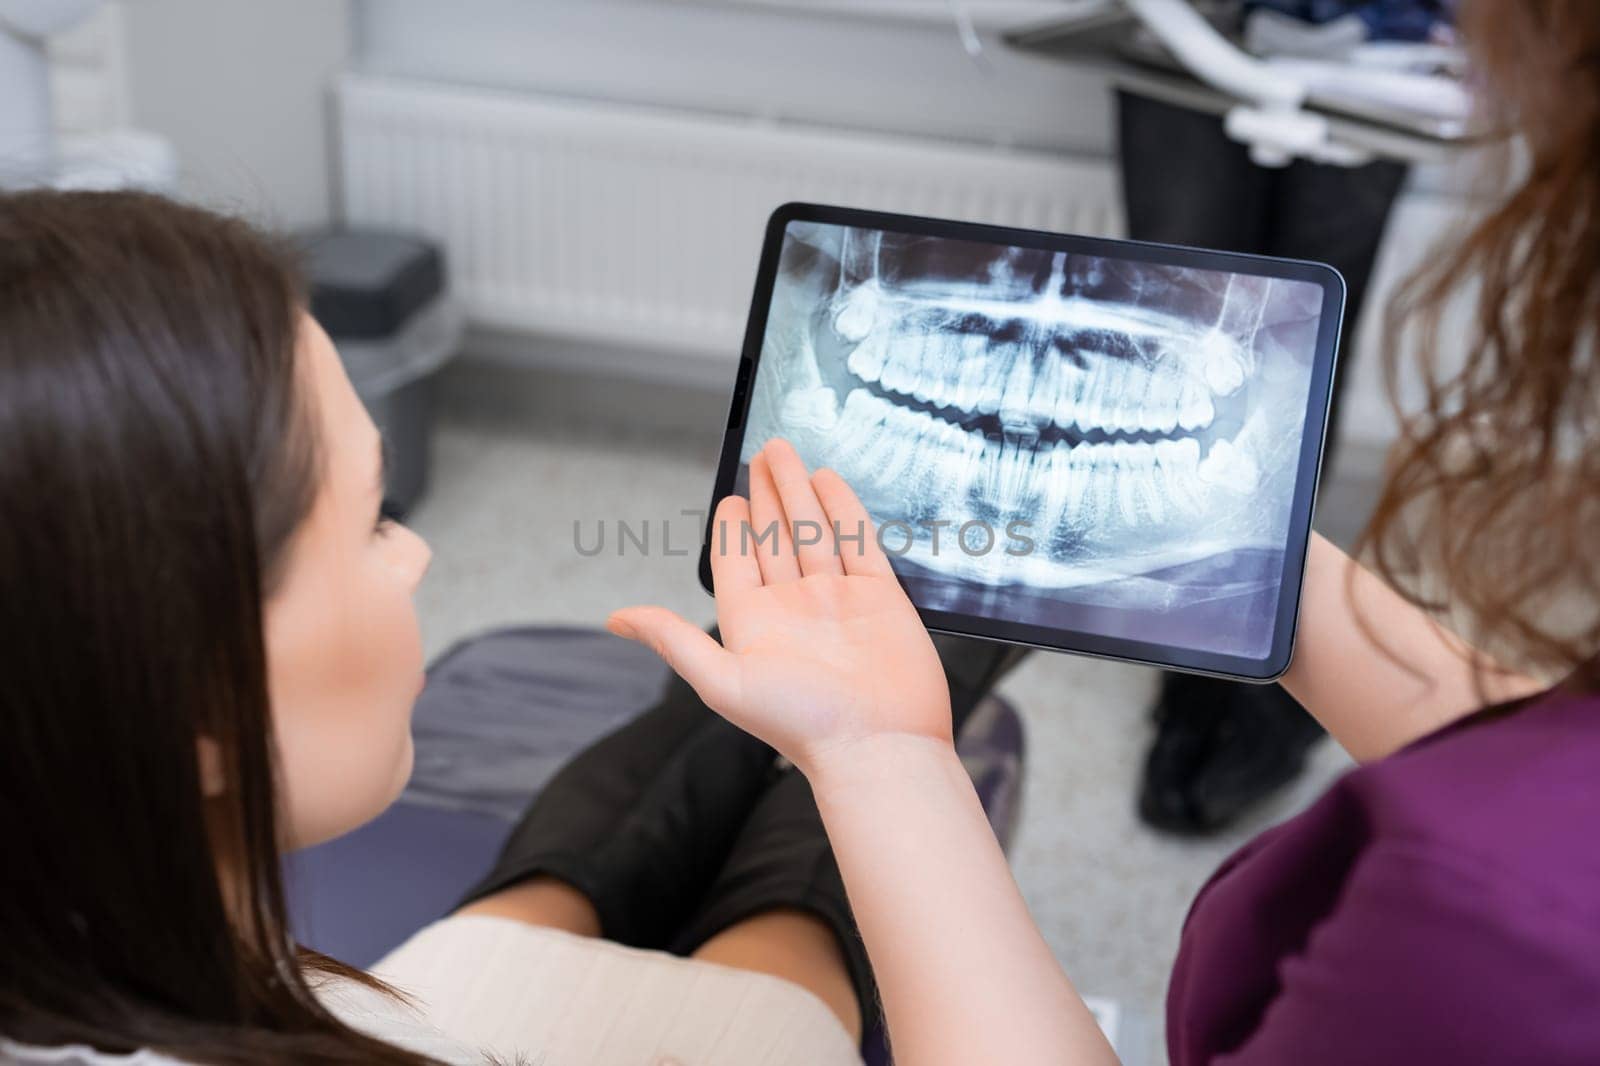 Utilizing a tablet to showcase the X ray image, dentist discusses treatment strategies with patient by vladimka